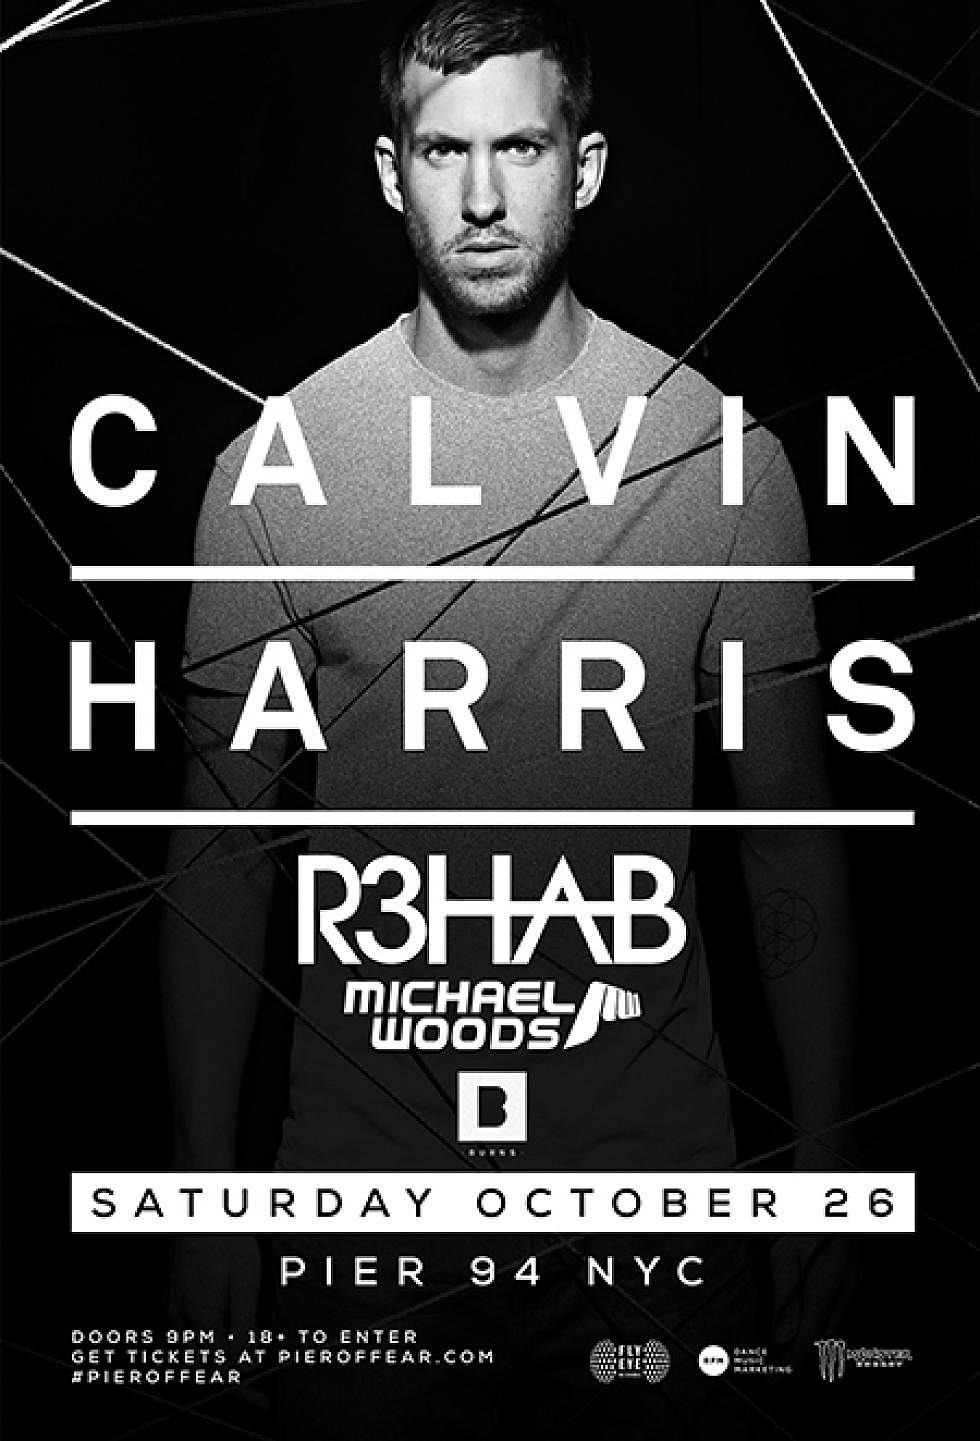 Win 2 VIP tickets to Calvin Harris @ Pier of Fear, NYC 10/25